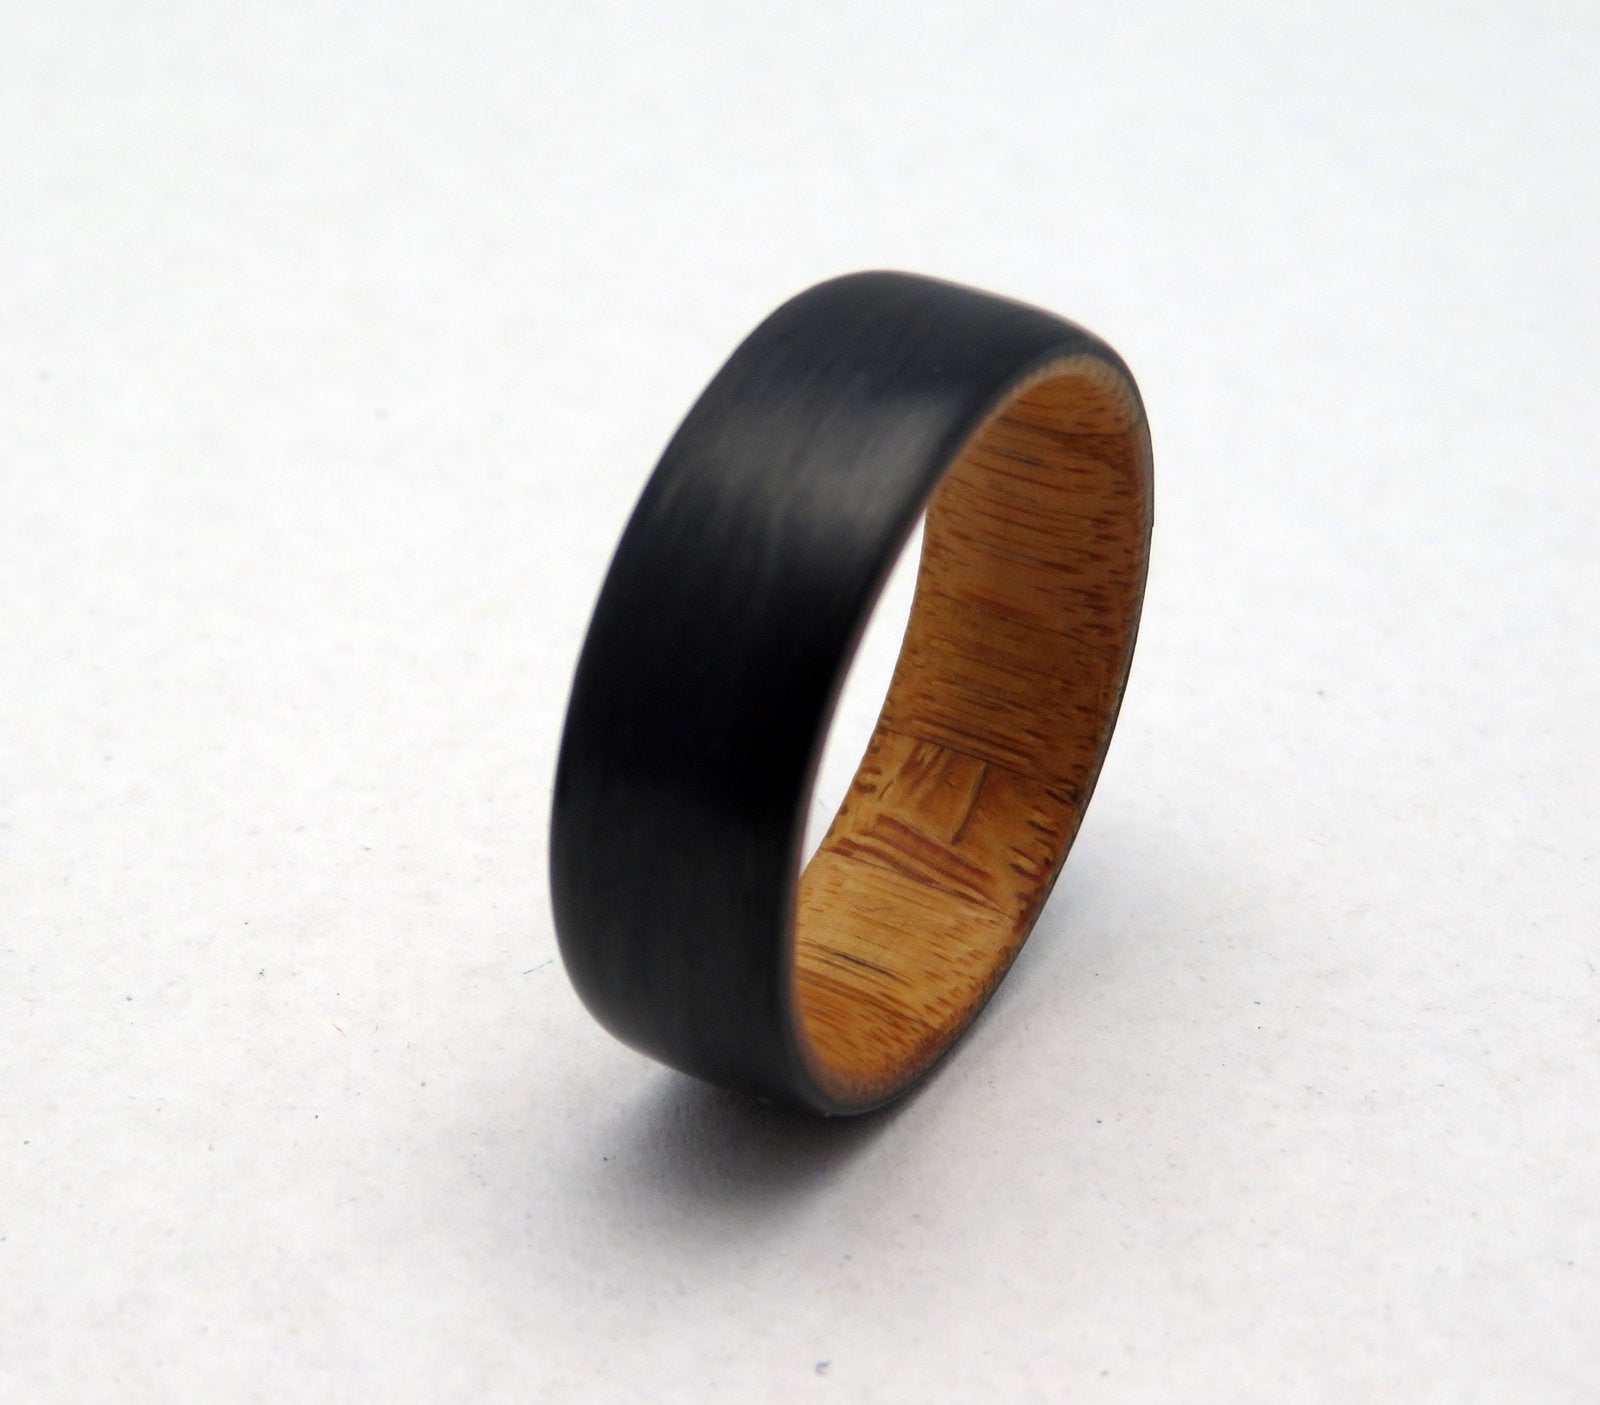 "The Panda" Bamboo and Carbon fiber wedding ring, Unique handmade wooden ring wrapped in Carbon Fiber